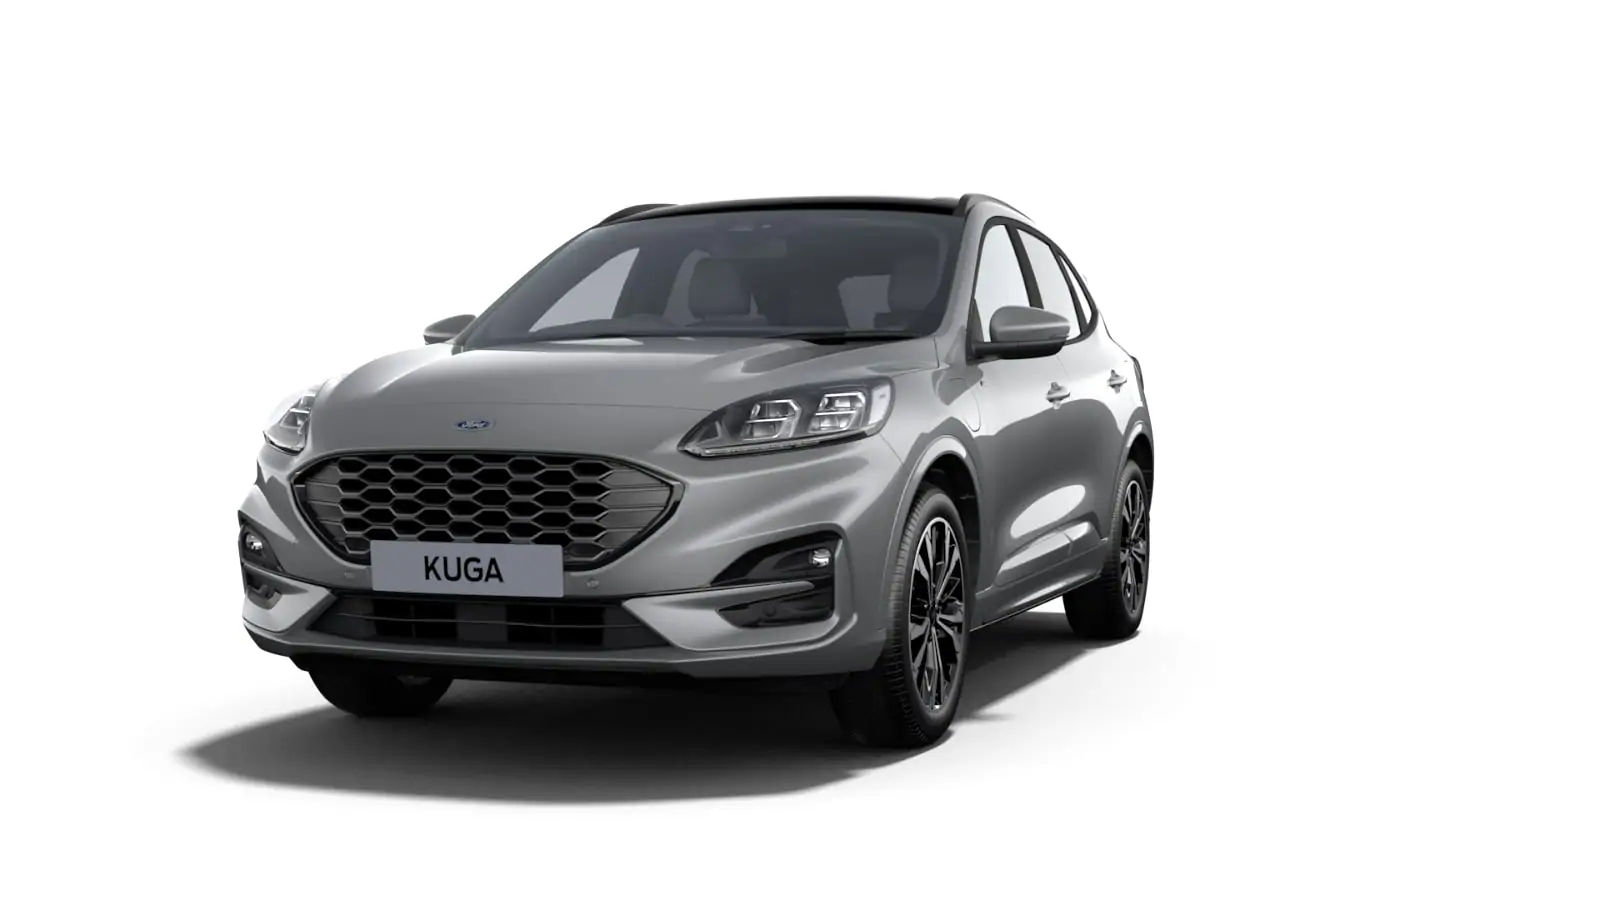 Nieuw Ford All-new kuga ST-Line X 2.5i PHEV 225pk/165kW - HF45 Auto NYH - "Solar Silver" Metaalkleur 1